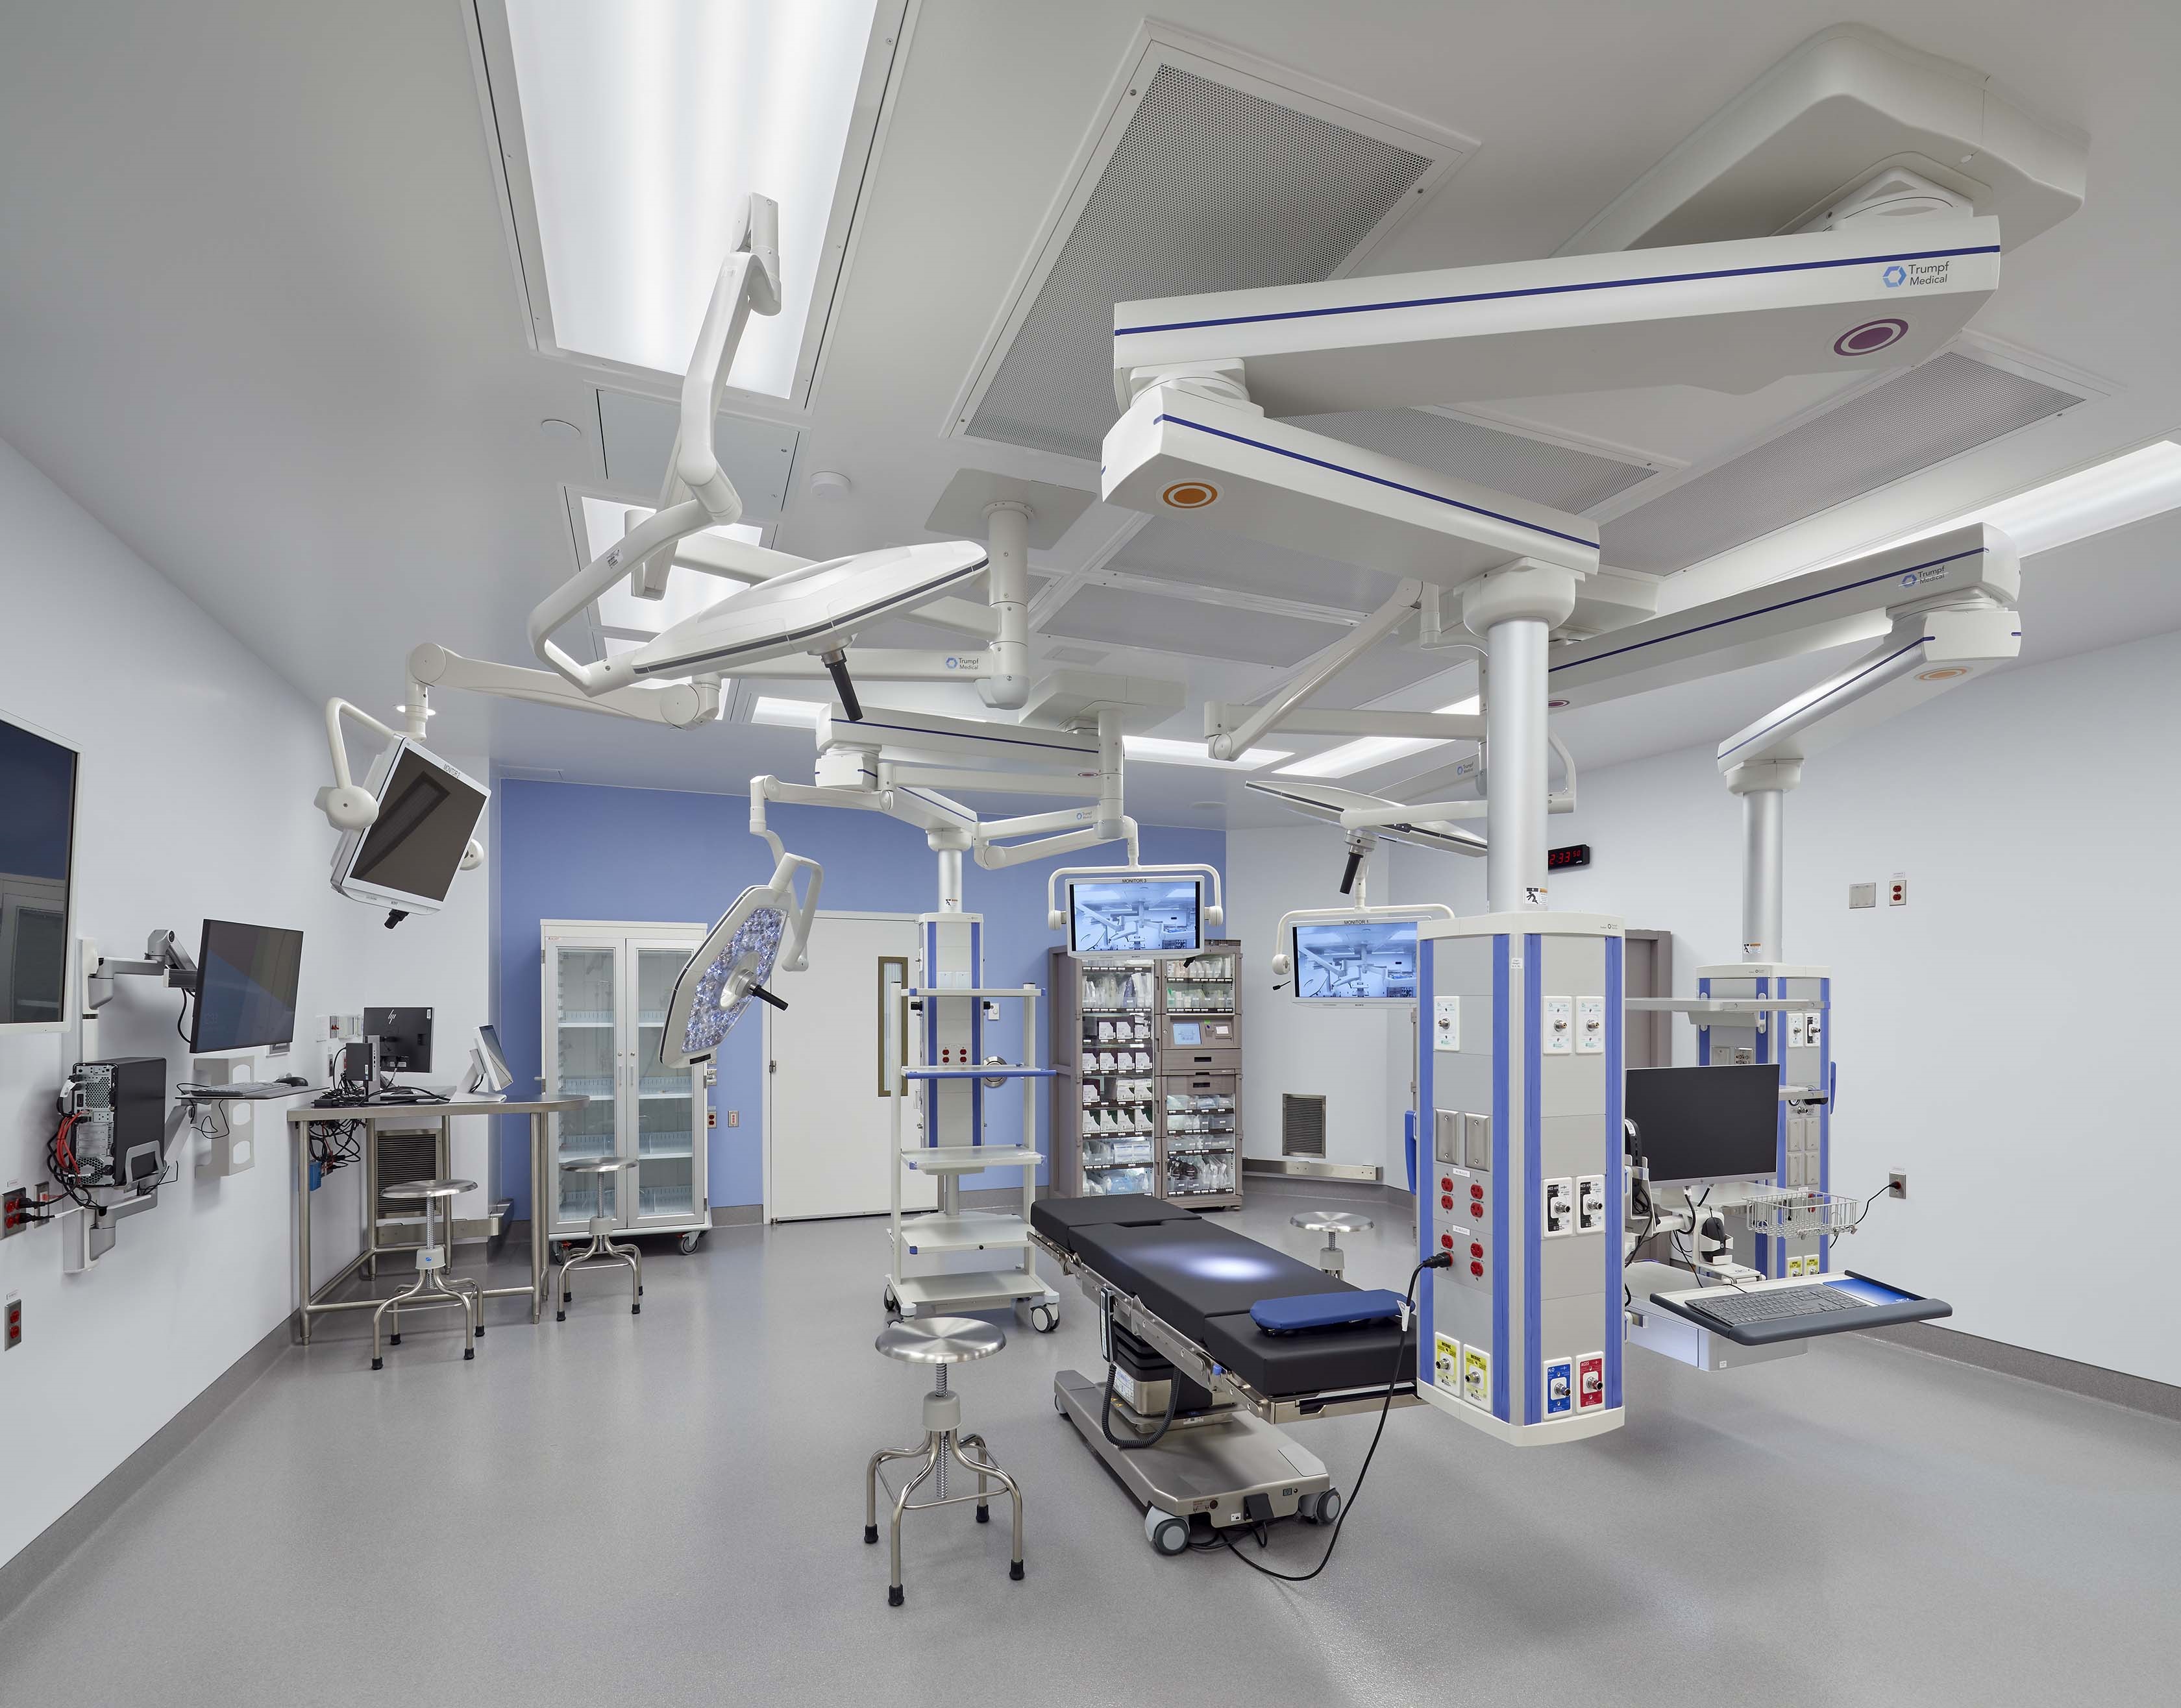 An operating room with equipment including operating table, lights, monitors, computers and equipment cabinets. The room is new and is empty.